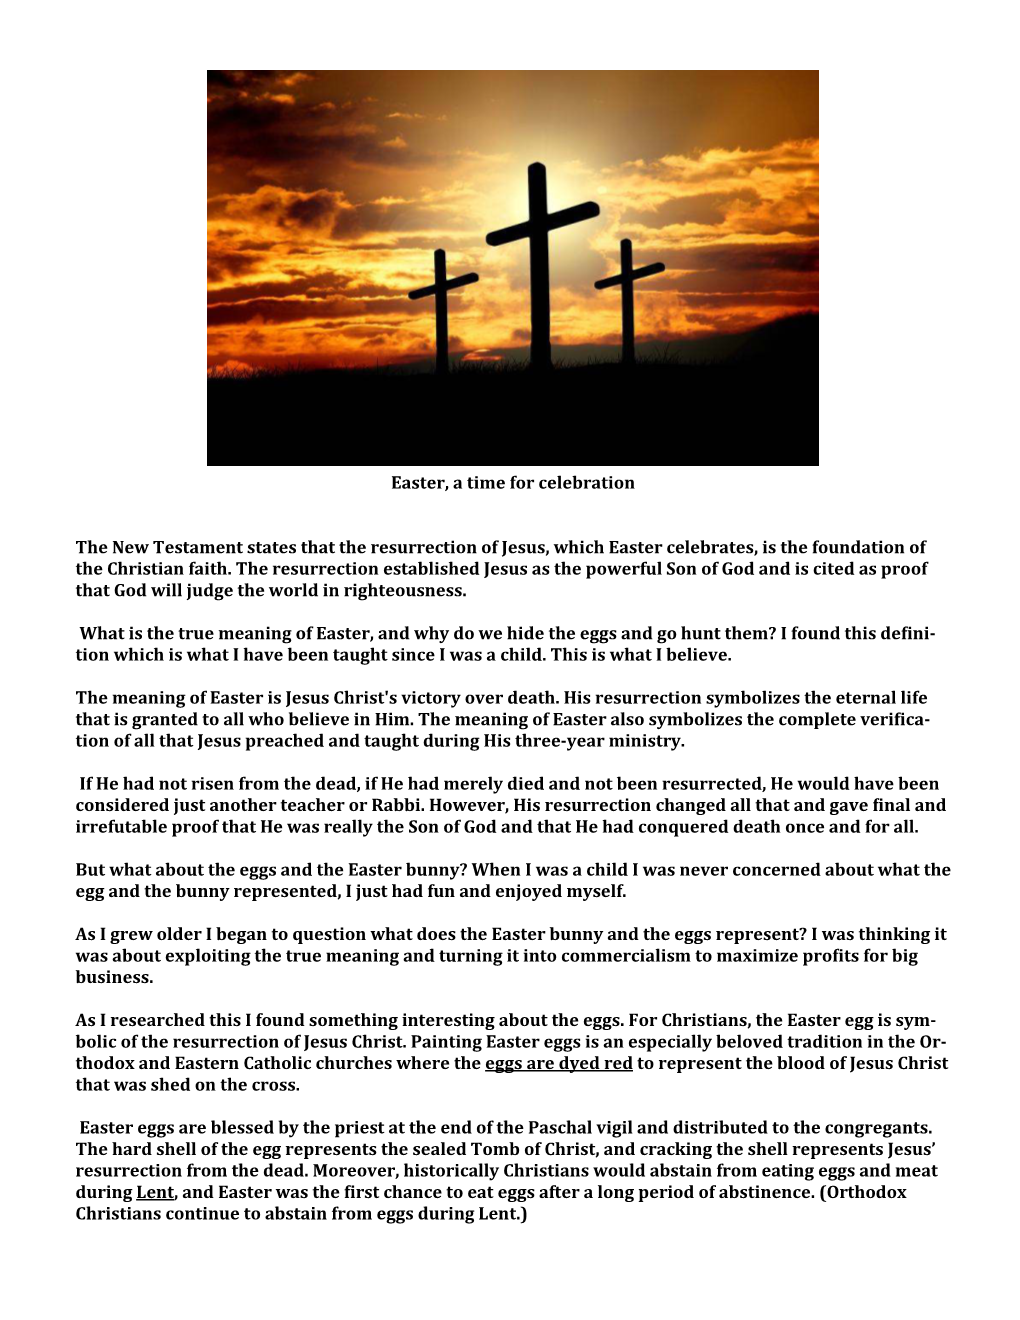 Easter, a Time for Celebration the New Testament States That The